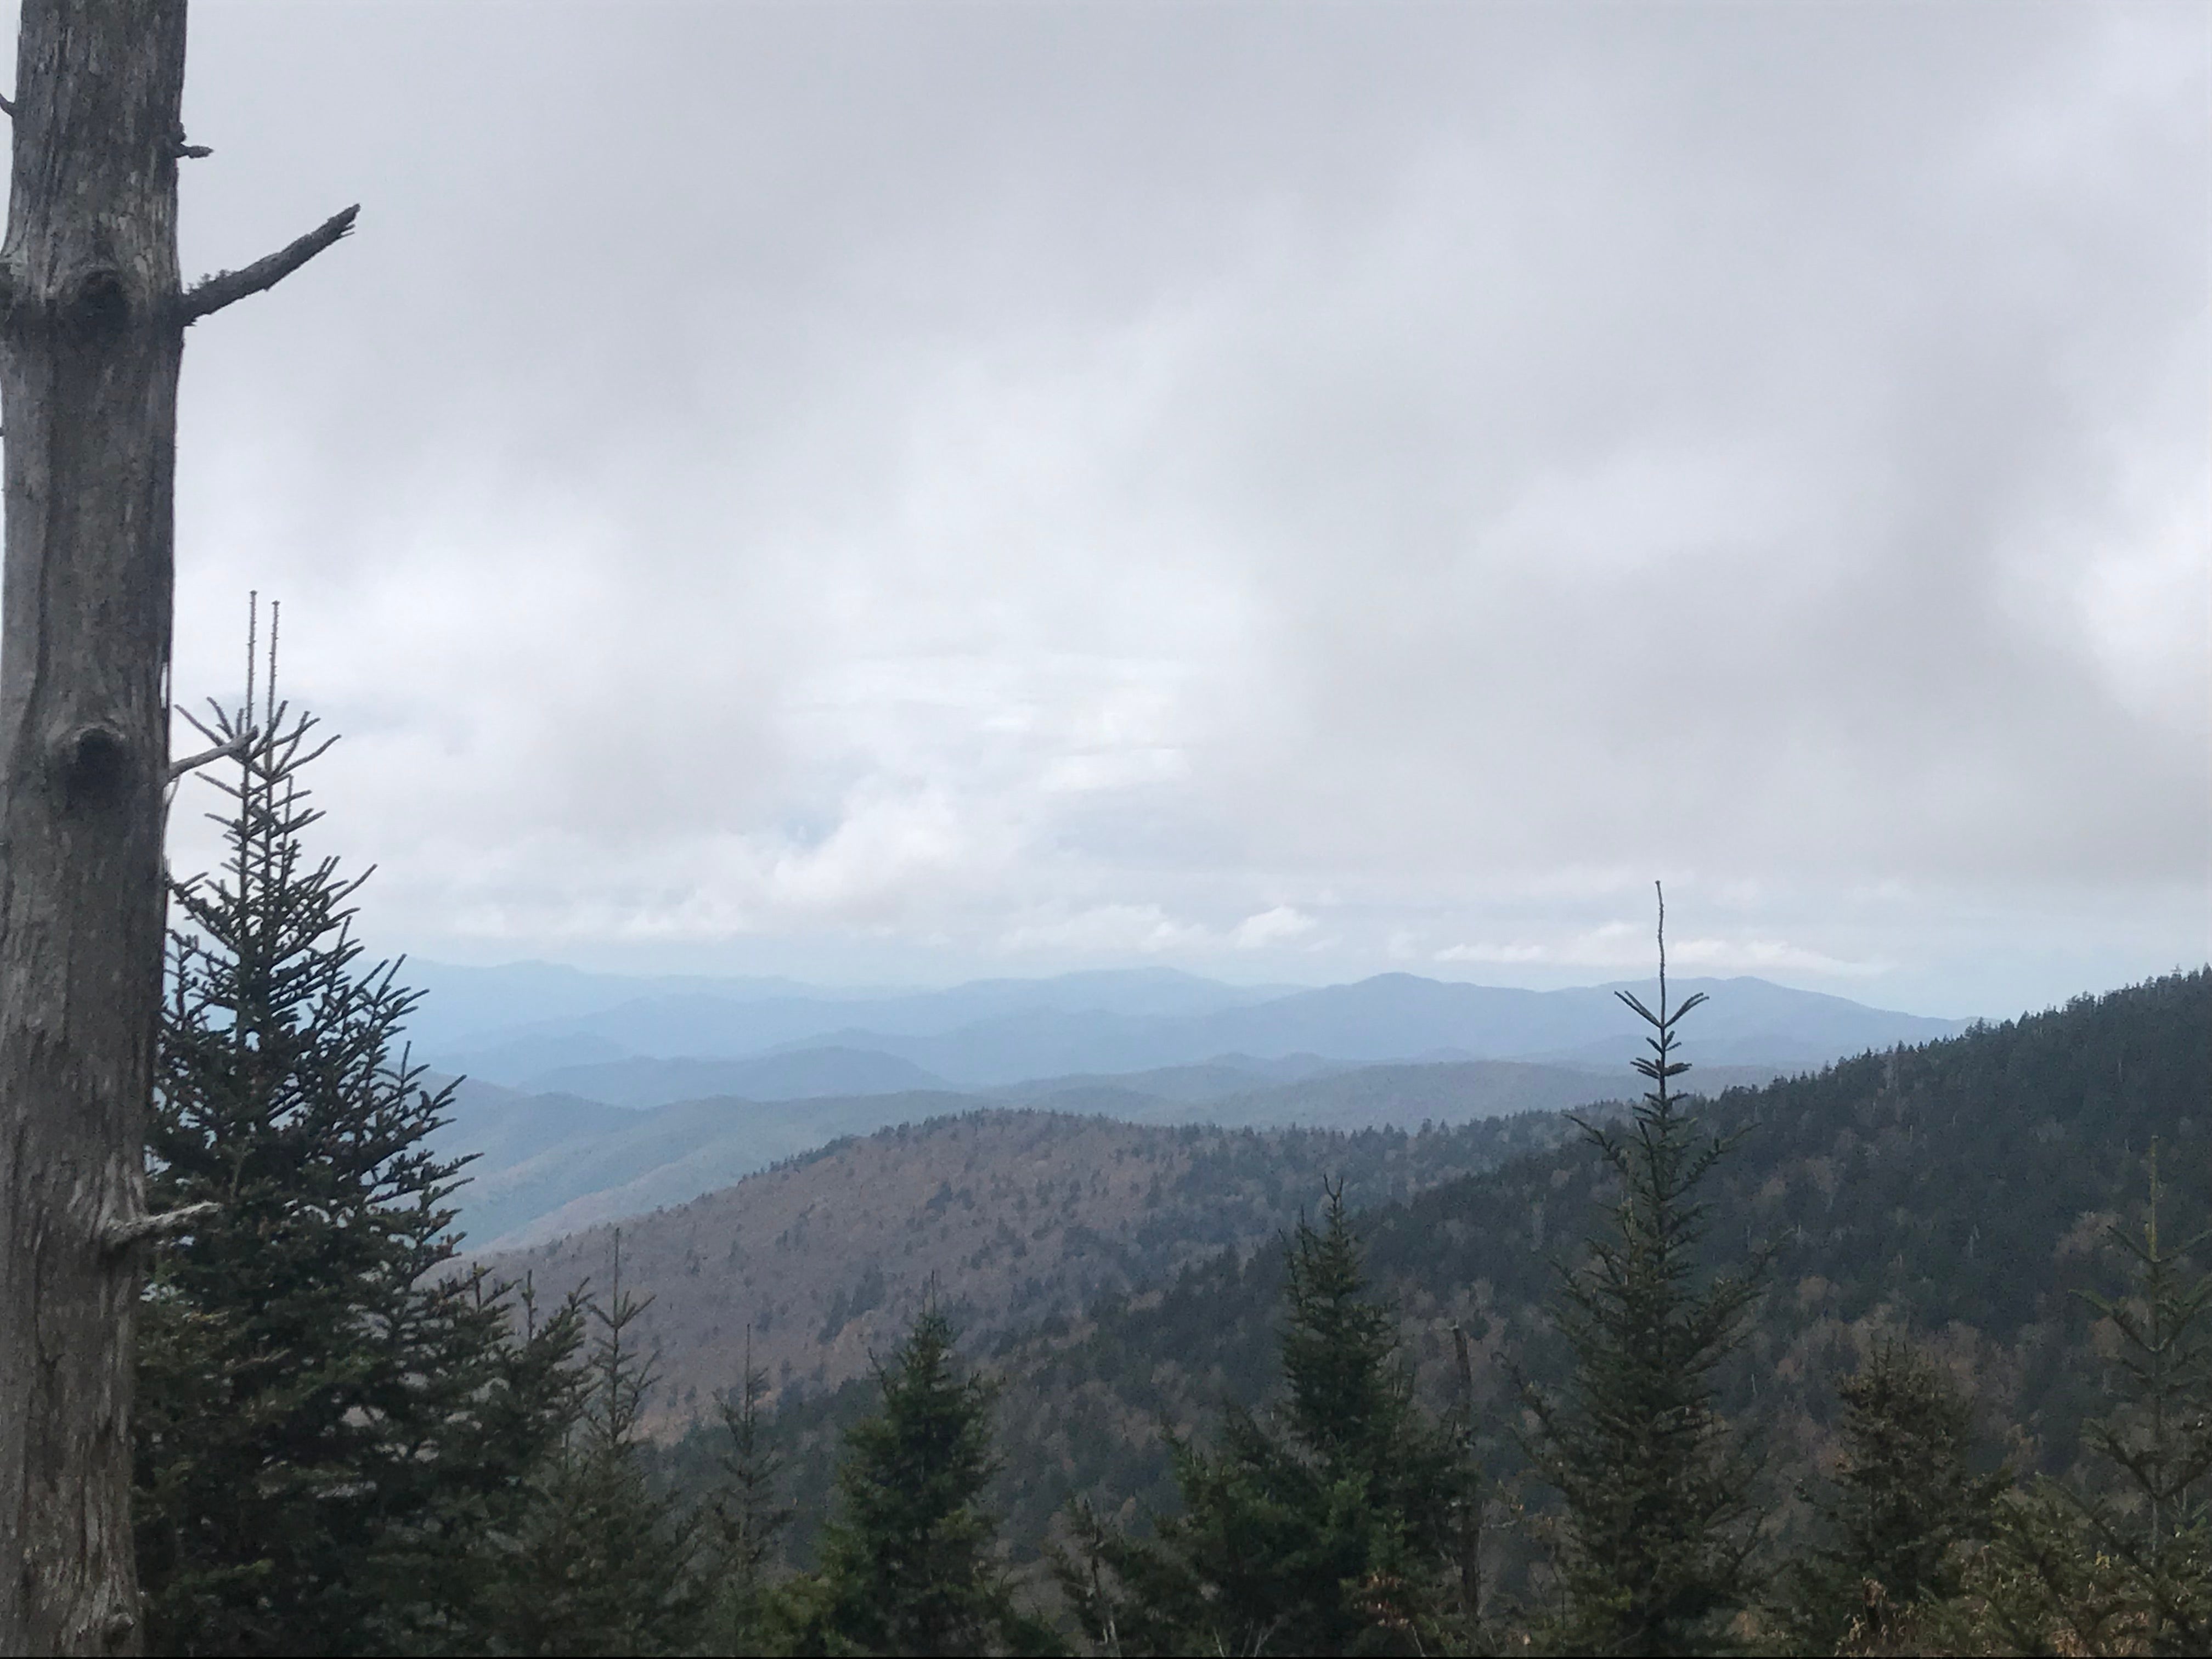 More photos from Clingman's Dome walkway